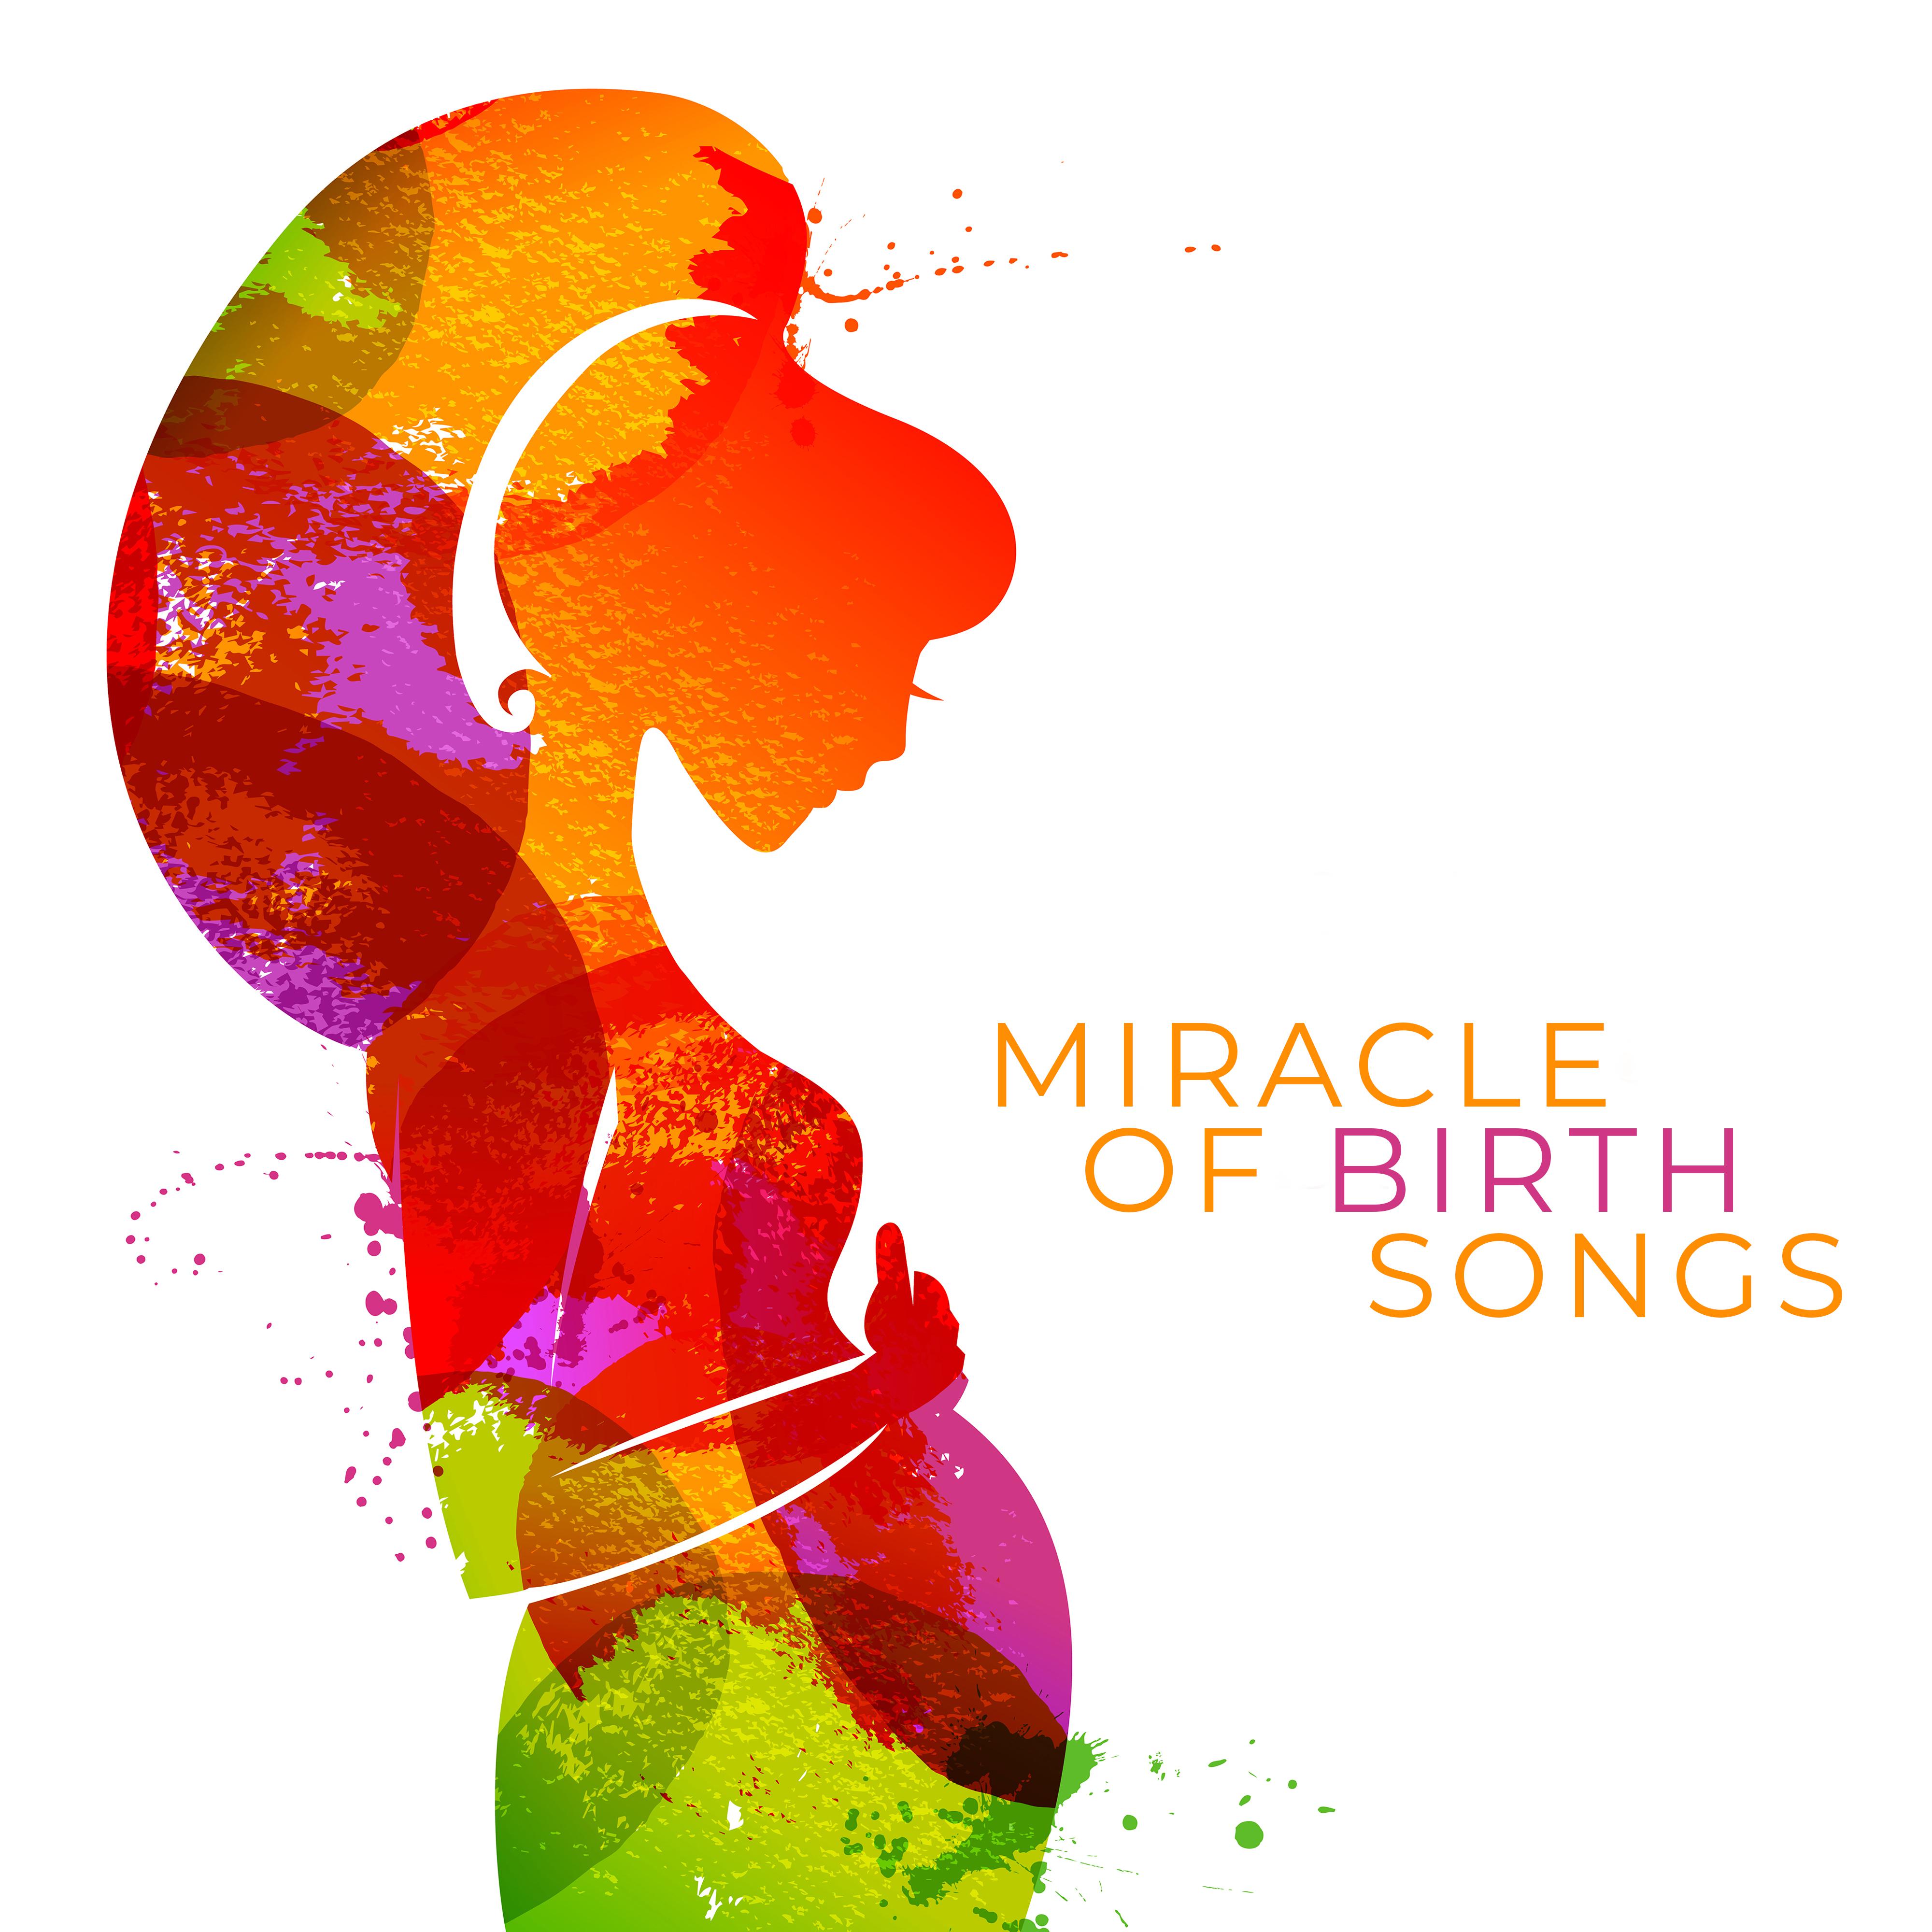 Miracle of Birth Songs: New Age Soothing 2019 Music to Listen Before Childbirth, Calming Down, Fight with Fears, Reduce Stress & Pain